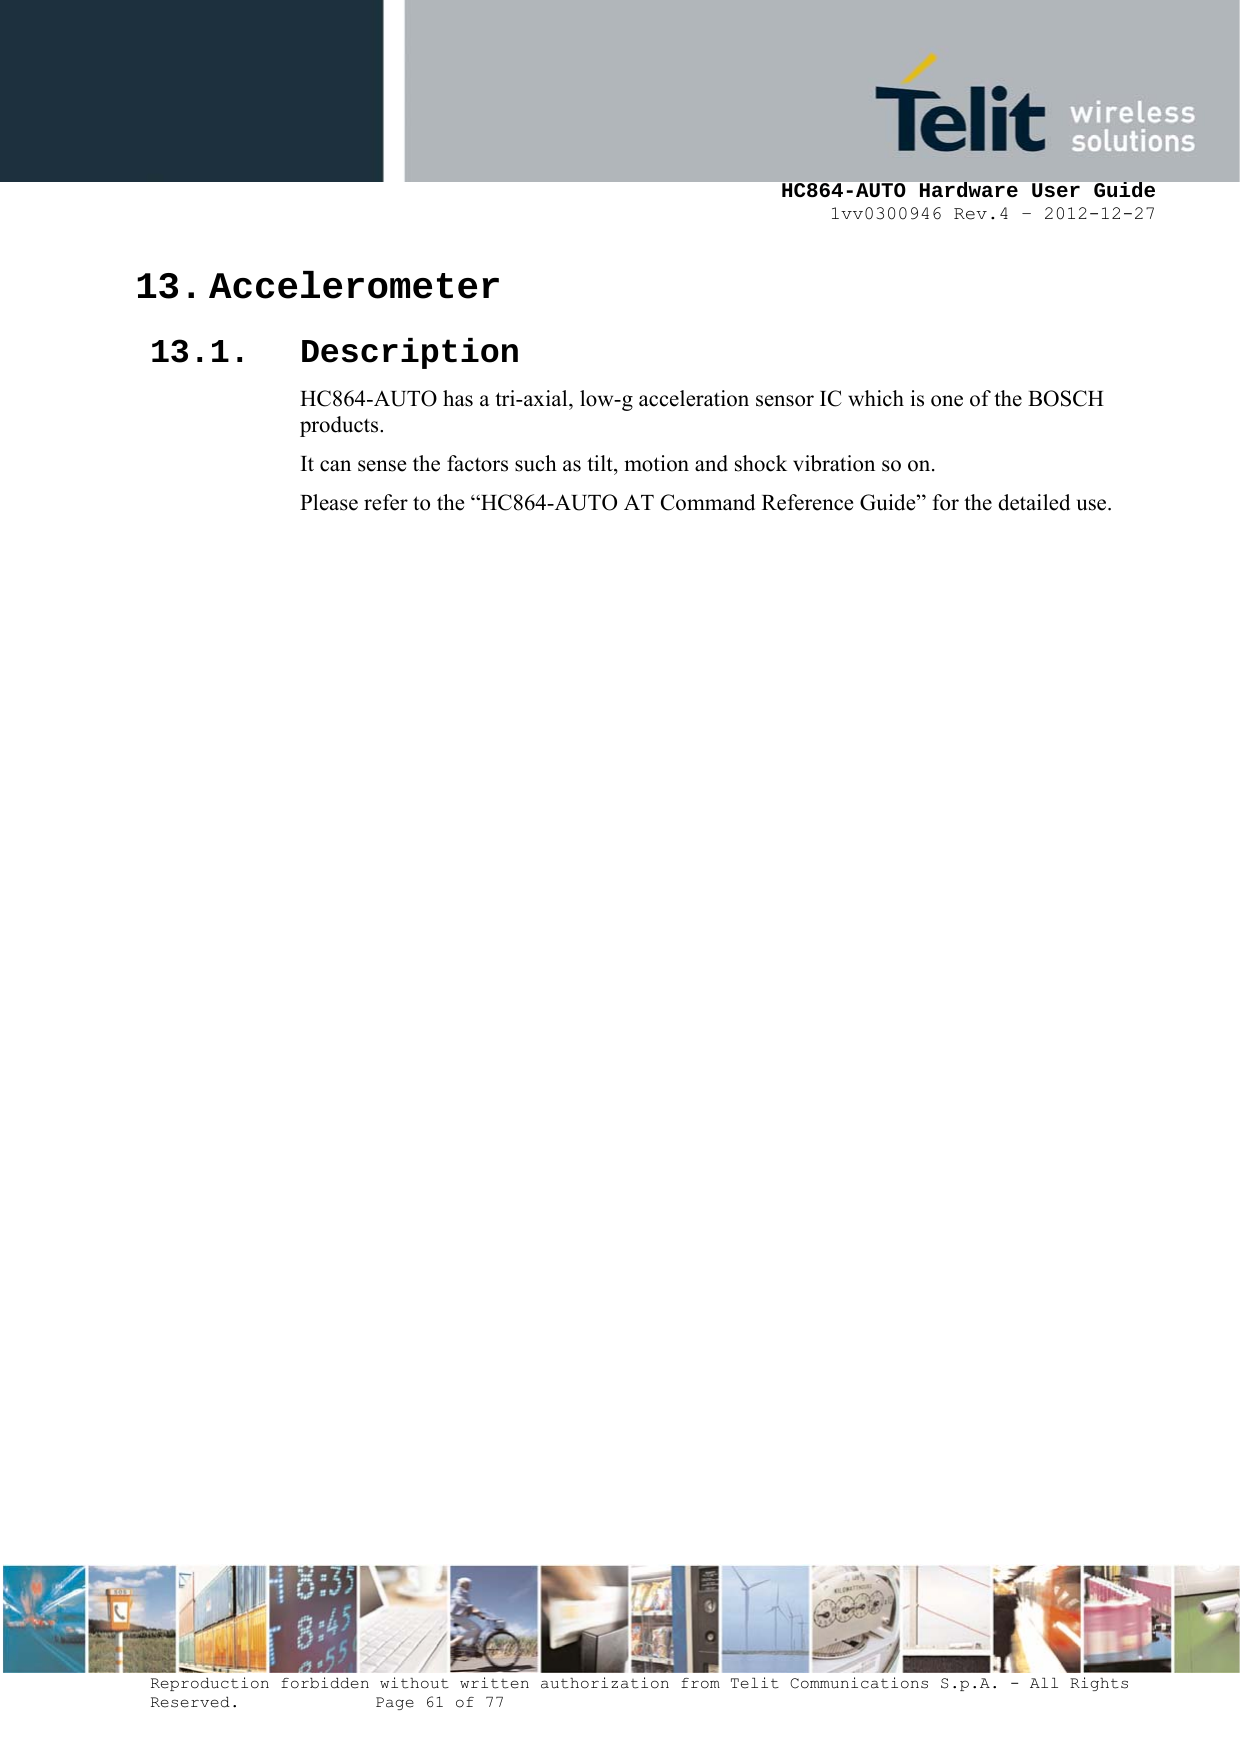     HC864-AUTO Hardware User Guide 1vv0300946 Rev.4 – 2012-12-27 Reproduction forbidden without written authorization from Telit Communications S.p.A. - All Rights Reserved.    Page 61 of 77  13. Accelerometer 13.1. Description HC864-AUTO has a tri-axial, low-g acceleration sensor IC which is one of the BOSCH products. It can sense the factors such as tilt, motion and shock vibration so on. Please refer to the “HC864-AUTO AT Command Reference Guide” for the detailed use. 